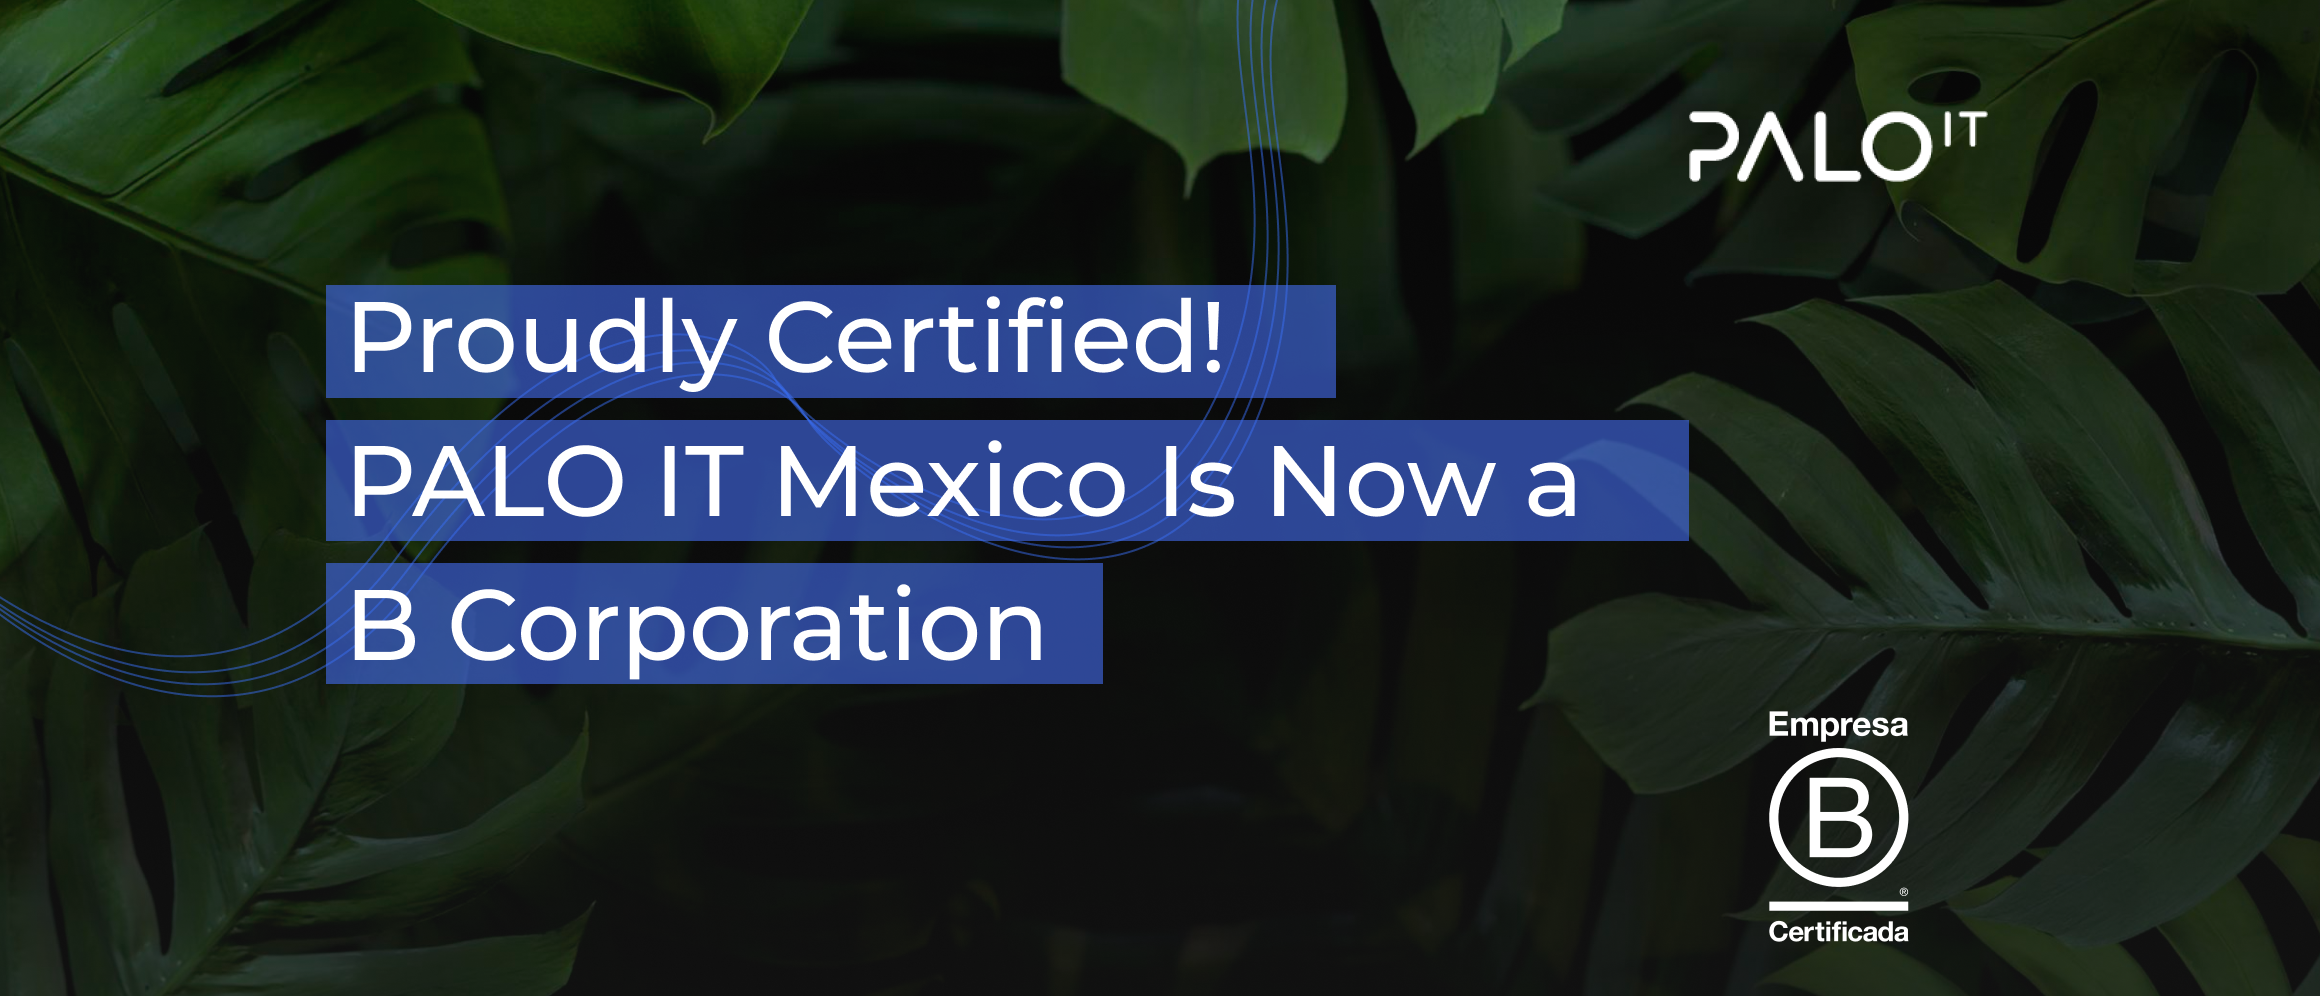 PALO IT Mexico: Technology Consultancy Certified as a B Corporation